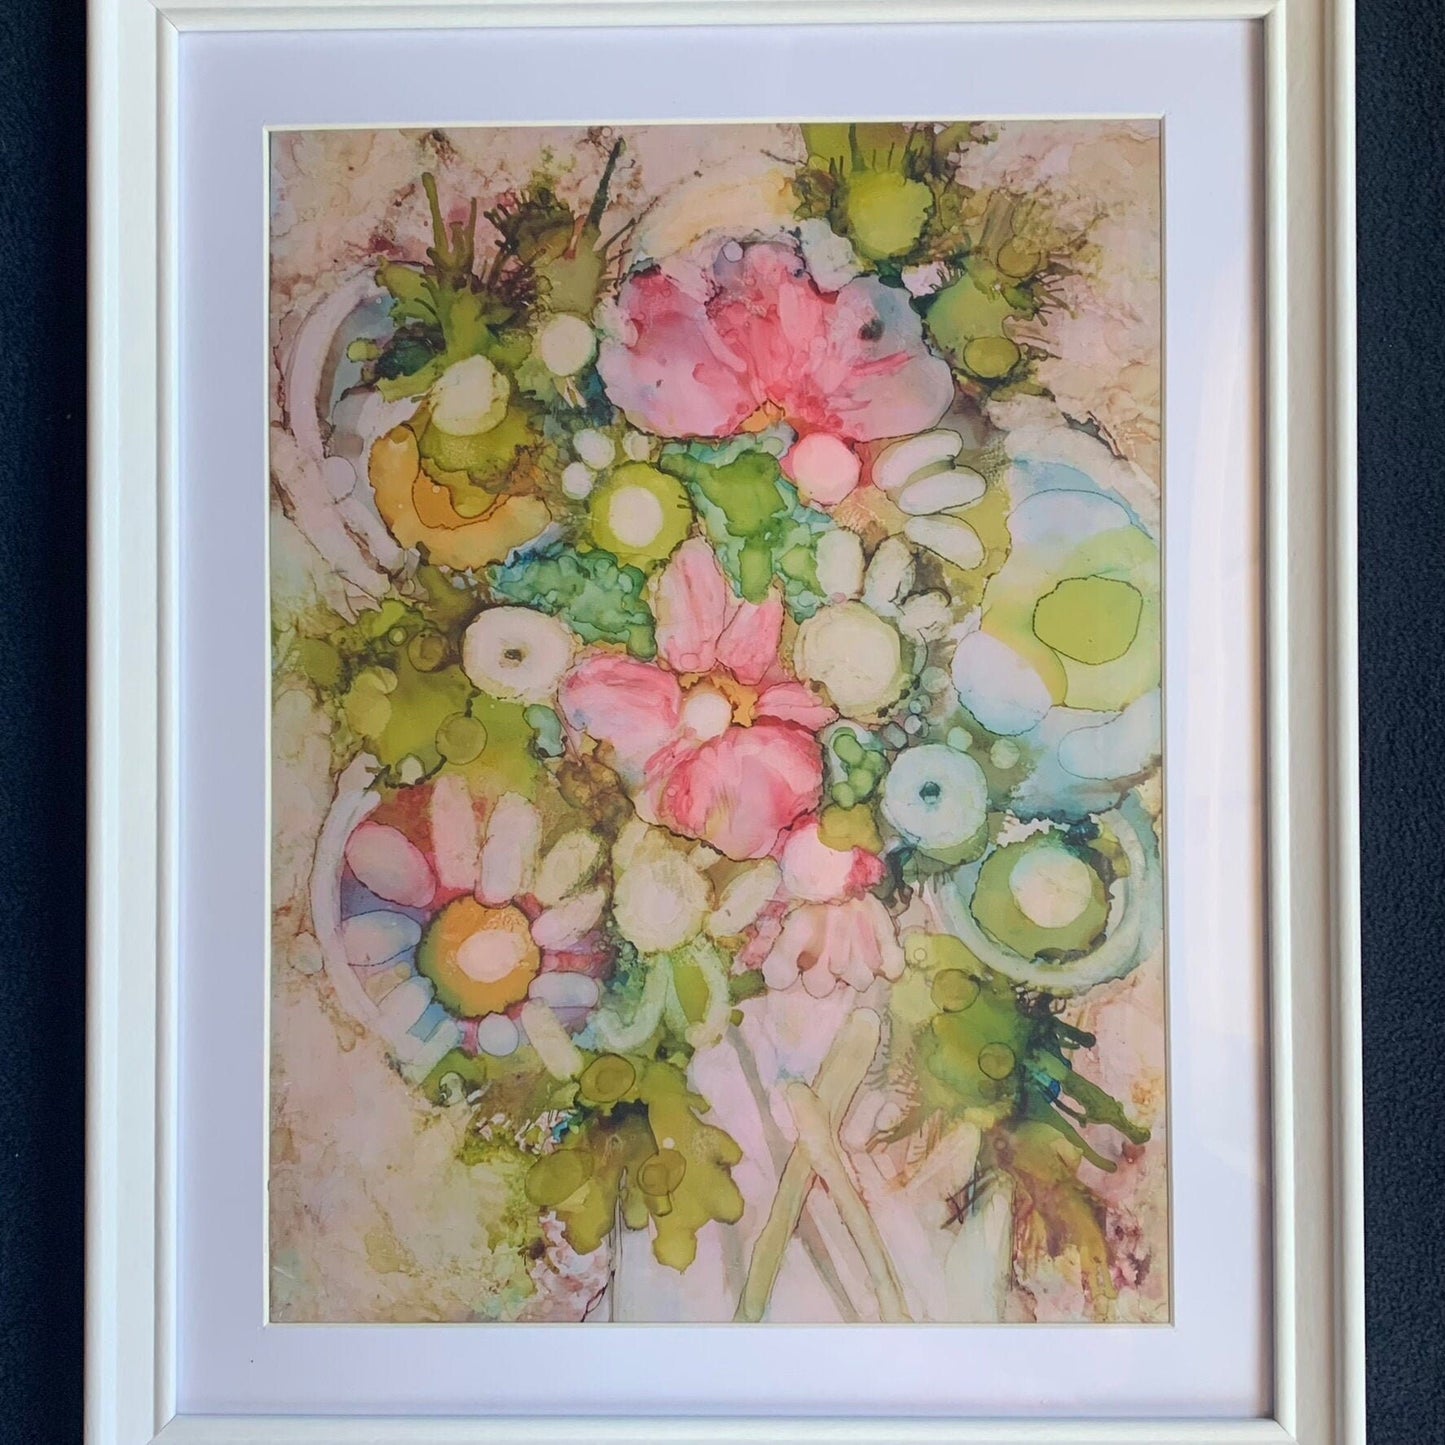 Floral Ink Abstract Pastel Painting #2 Rainbow colors Whimsical art One of a kind nature wall art Garden decor feminine flower lover gift